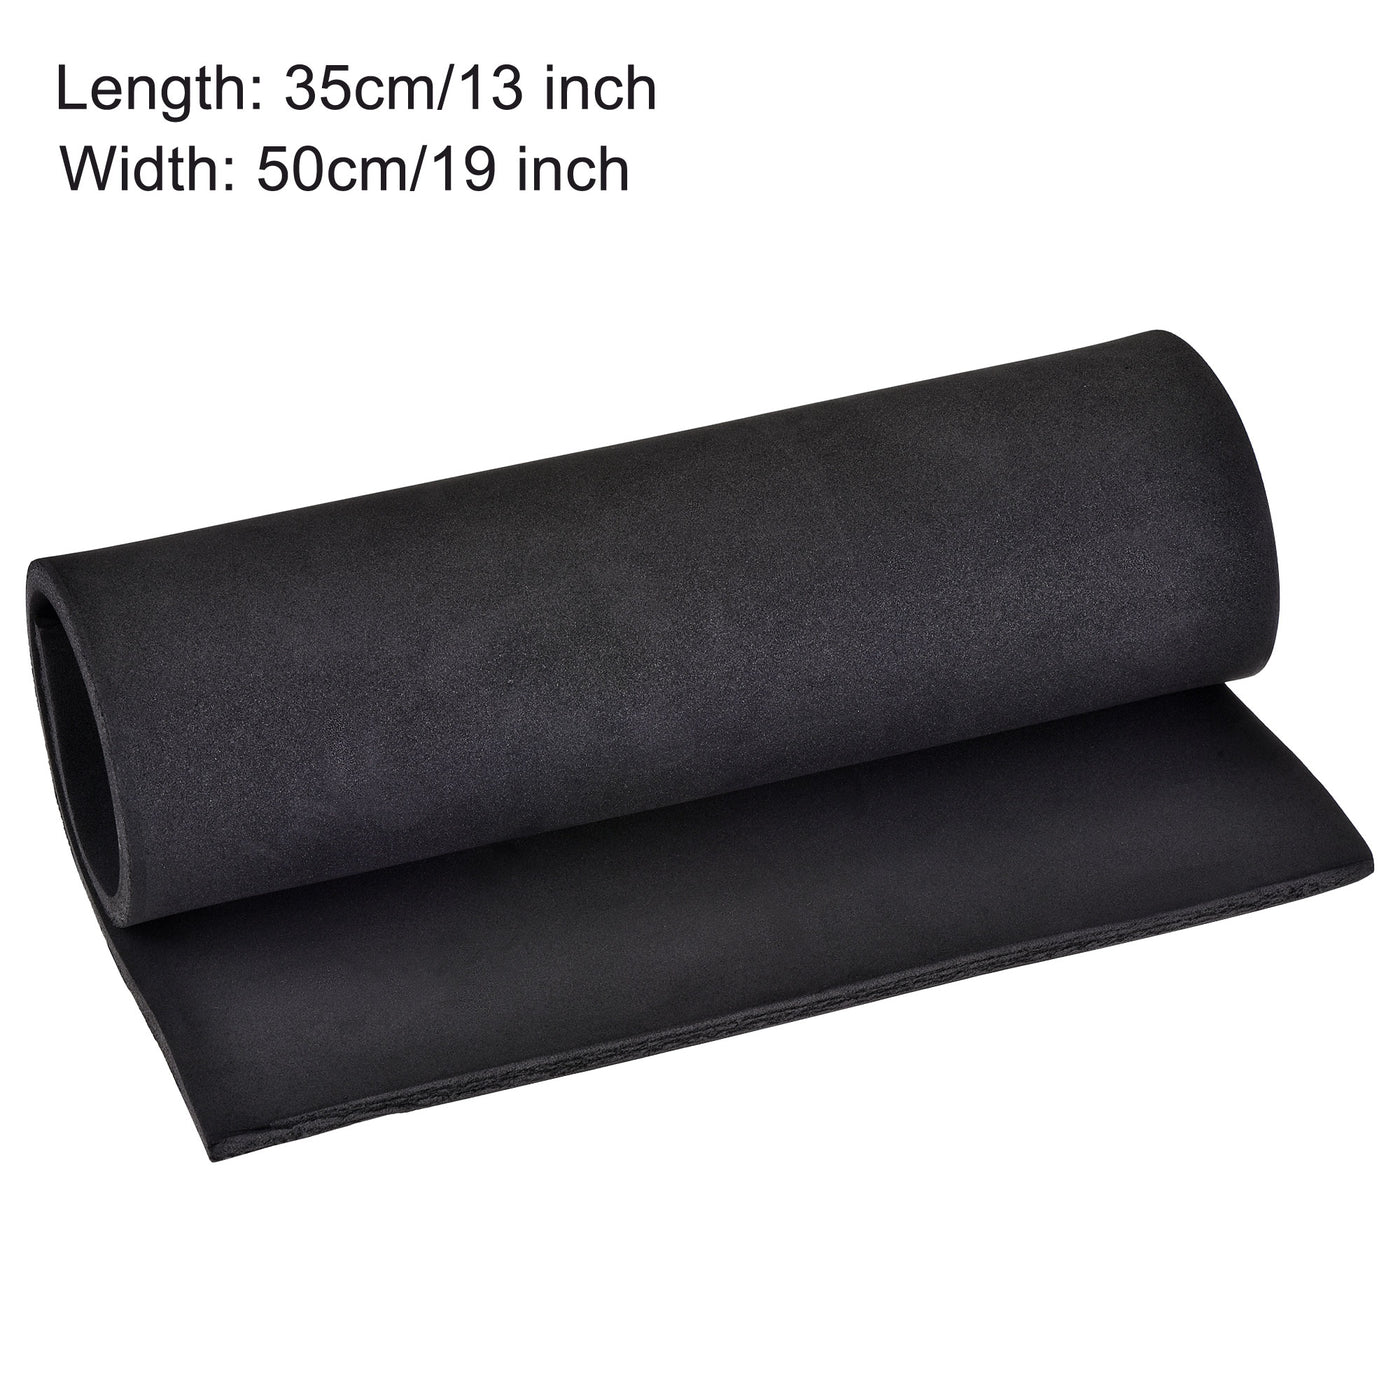 Uxcell Uxcell Black EVA Foam Sheets Roll 13 x 19 Inch 1mm Thick for Crafts DIY Projects